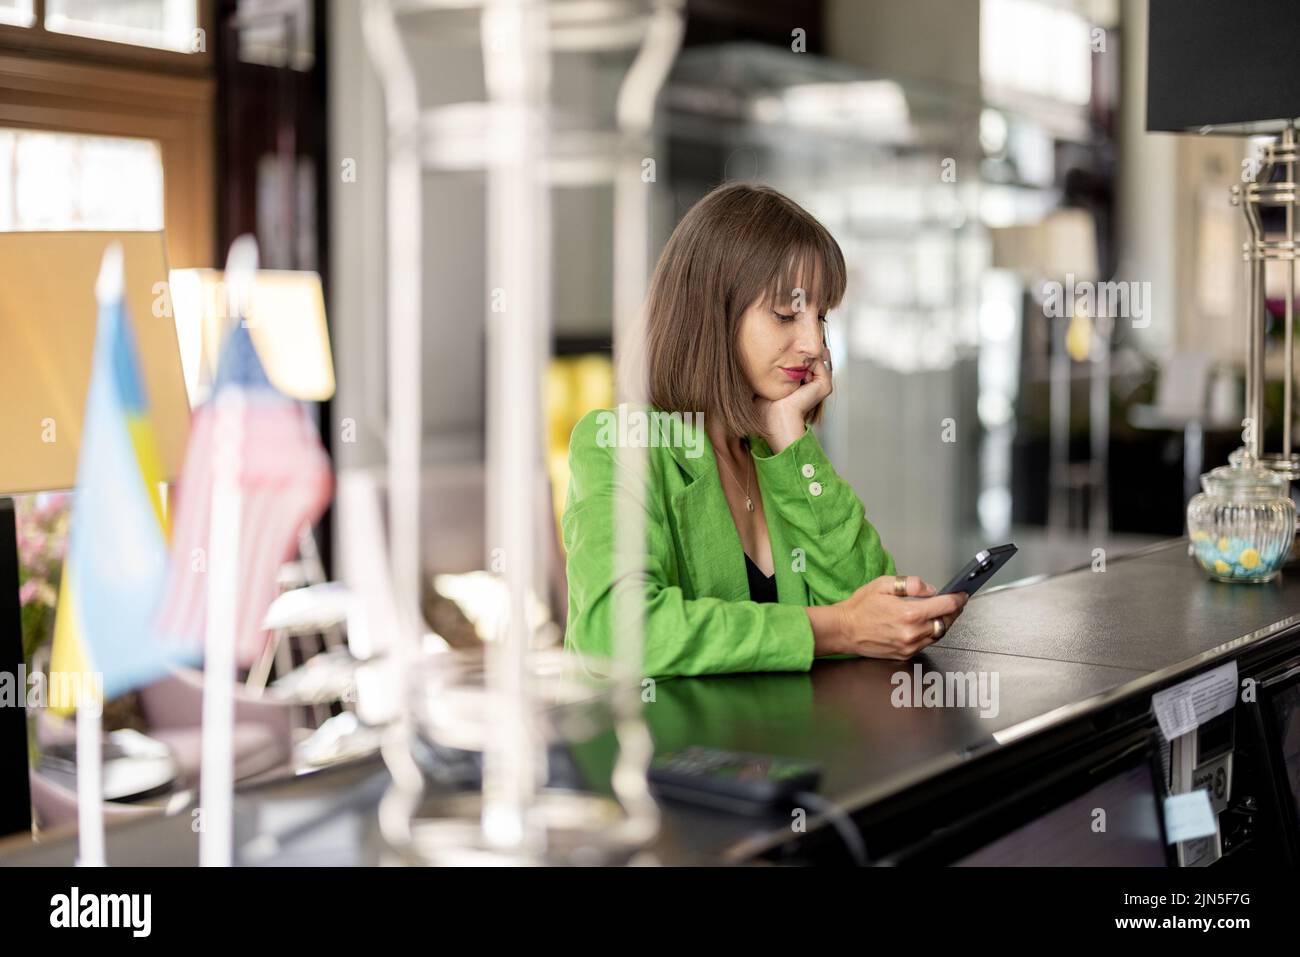 Business woman at hotel reception Stock Photo